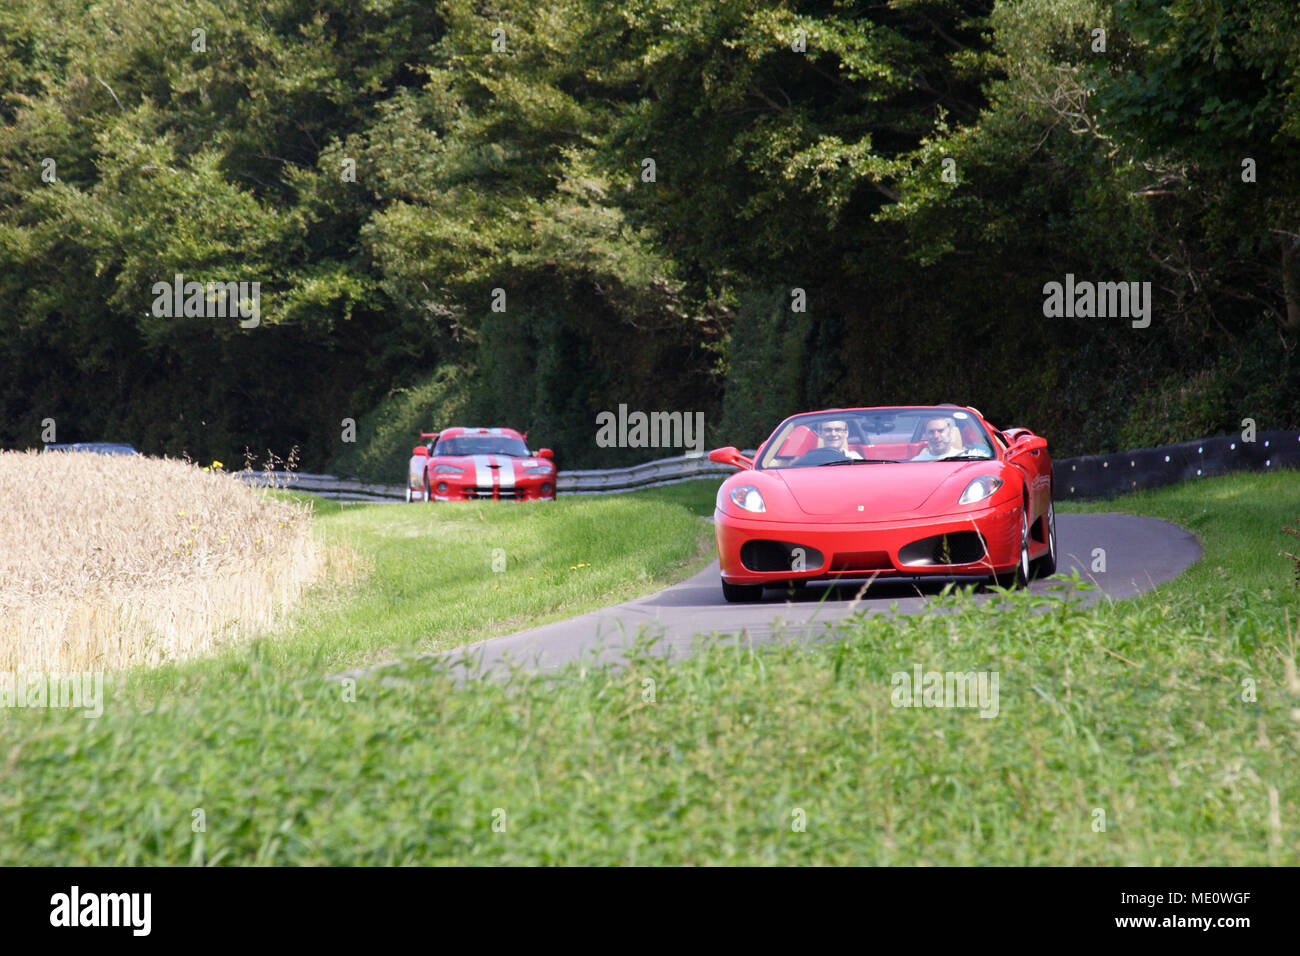 Red Ferrari 360 spider and red Dodge Viper road cars racing on track Stock Photo